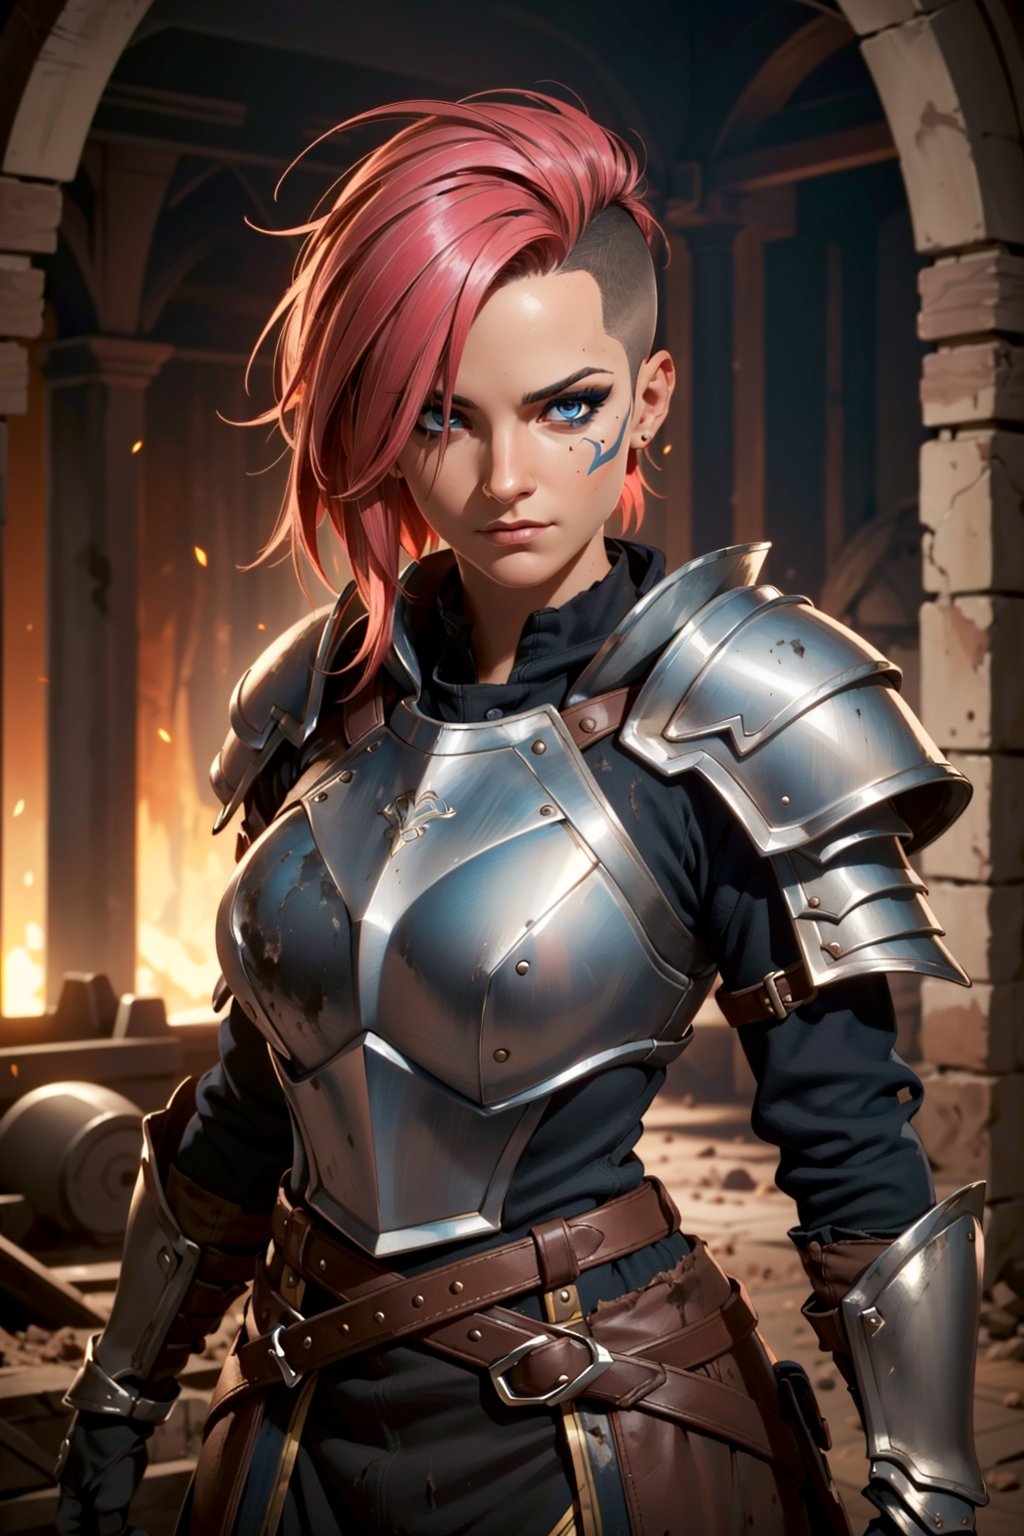 (16k ultra high definition, perfect face, photorealistic:1.5, photo, masterpiece, realistic, realism, photorealism, high contrast, detailed, skin texture, hyper detailed, realistic skin texture, facial features, best quality, ultra high res, high resolution, detailed), Woman, (celtic face paint:1.3, pink hair with black roots, neutral expression, buzz cut), sholder armor, breast_plate, hip armor, brown leather gloves, ragged cloak:1.5,medieval armor, hip armor plates, (Dirty ragged clothes:1.5), battle, mud, ripped_clothing, Blue eyes, holding gladius